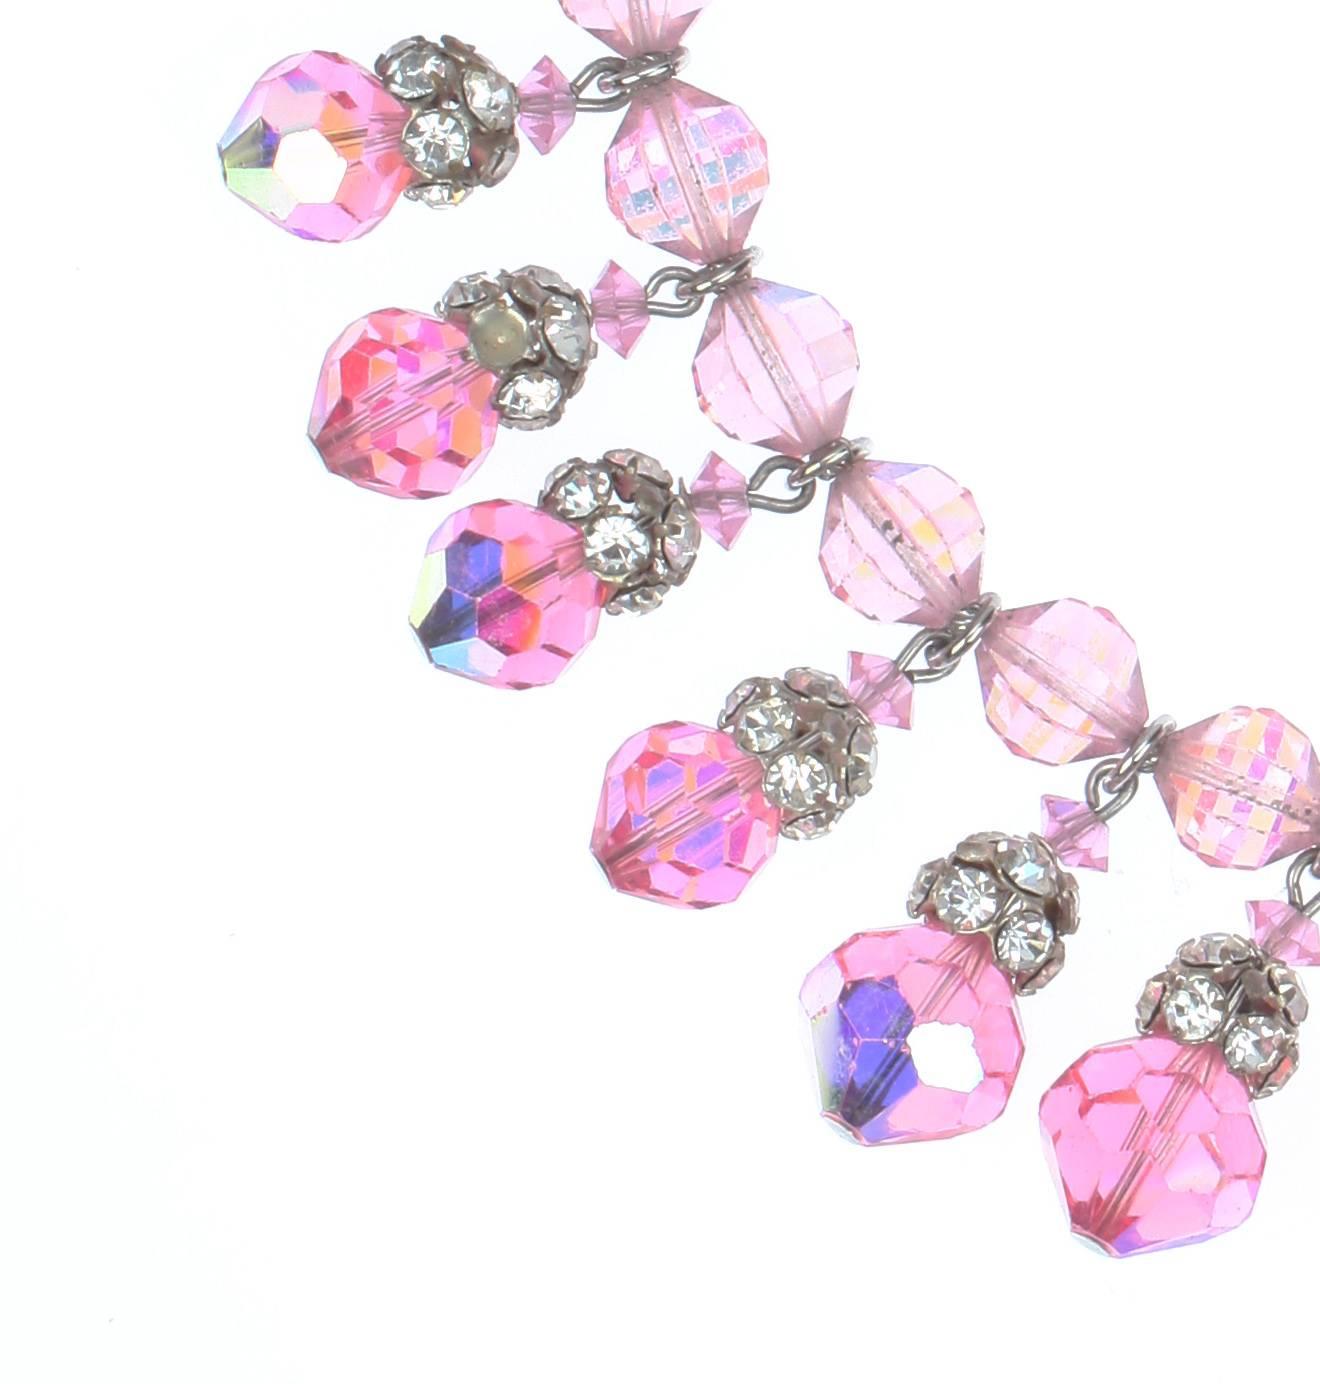 A stunning Chocker composed of Vintage Pink Swarovski AB faceted crystals and Silvertone rhinestone bead caps, c.1955.
Made by Coro for their most exclusive jewellery line, Vendome.
The necklace is 35cm long with a 5cm extension chain, finished